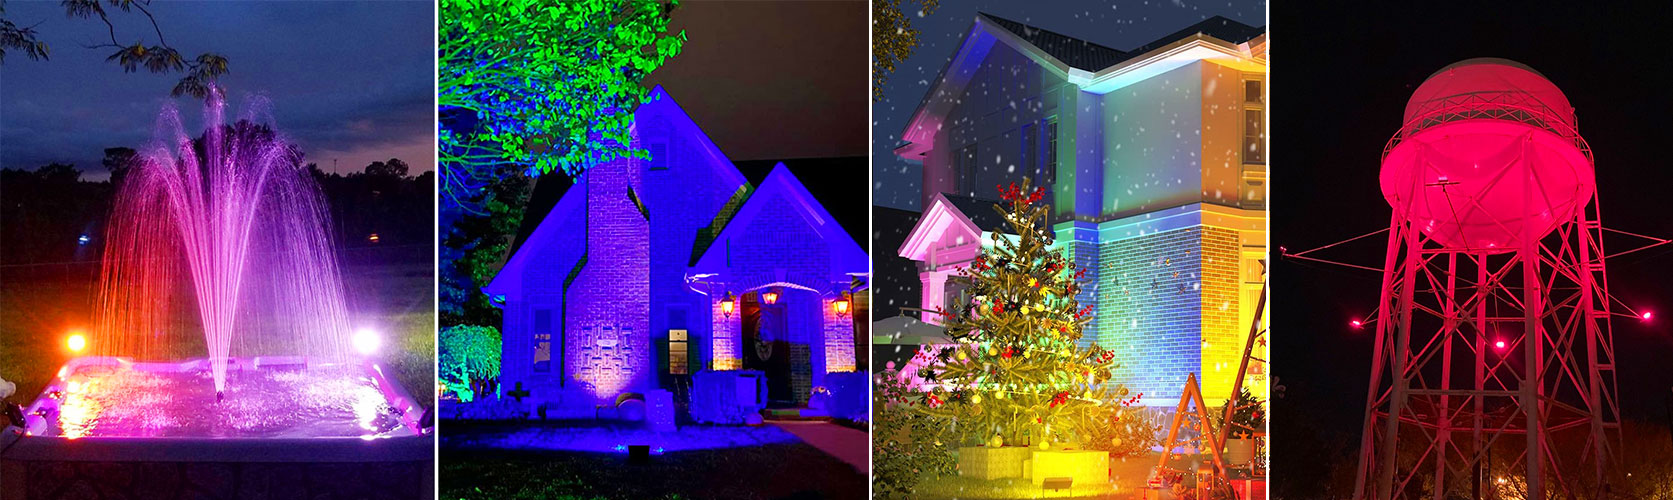 This kind floodlight is used for RGB ambient lighting of the swimming pool，church facades and Christmas tree.It looks beautiful at night.